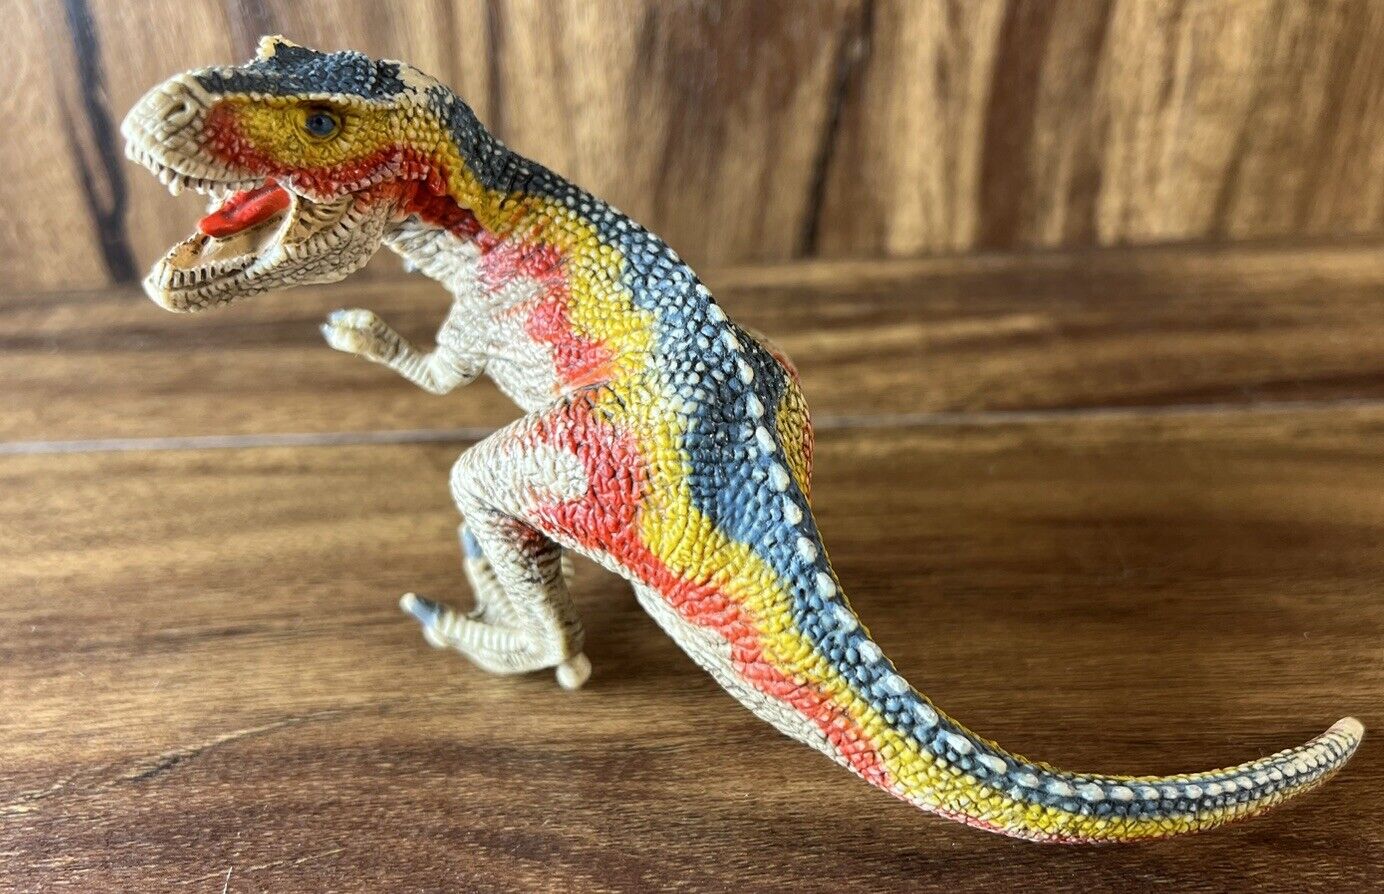 Schleich T-Rex World of Dinosaurs Colorful Tyrannosaurus Rex Small Scale Retired